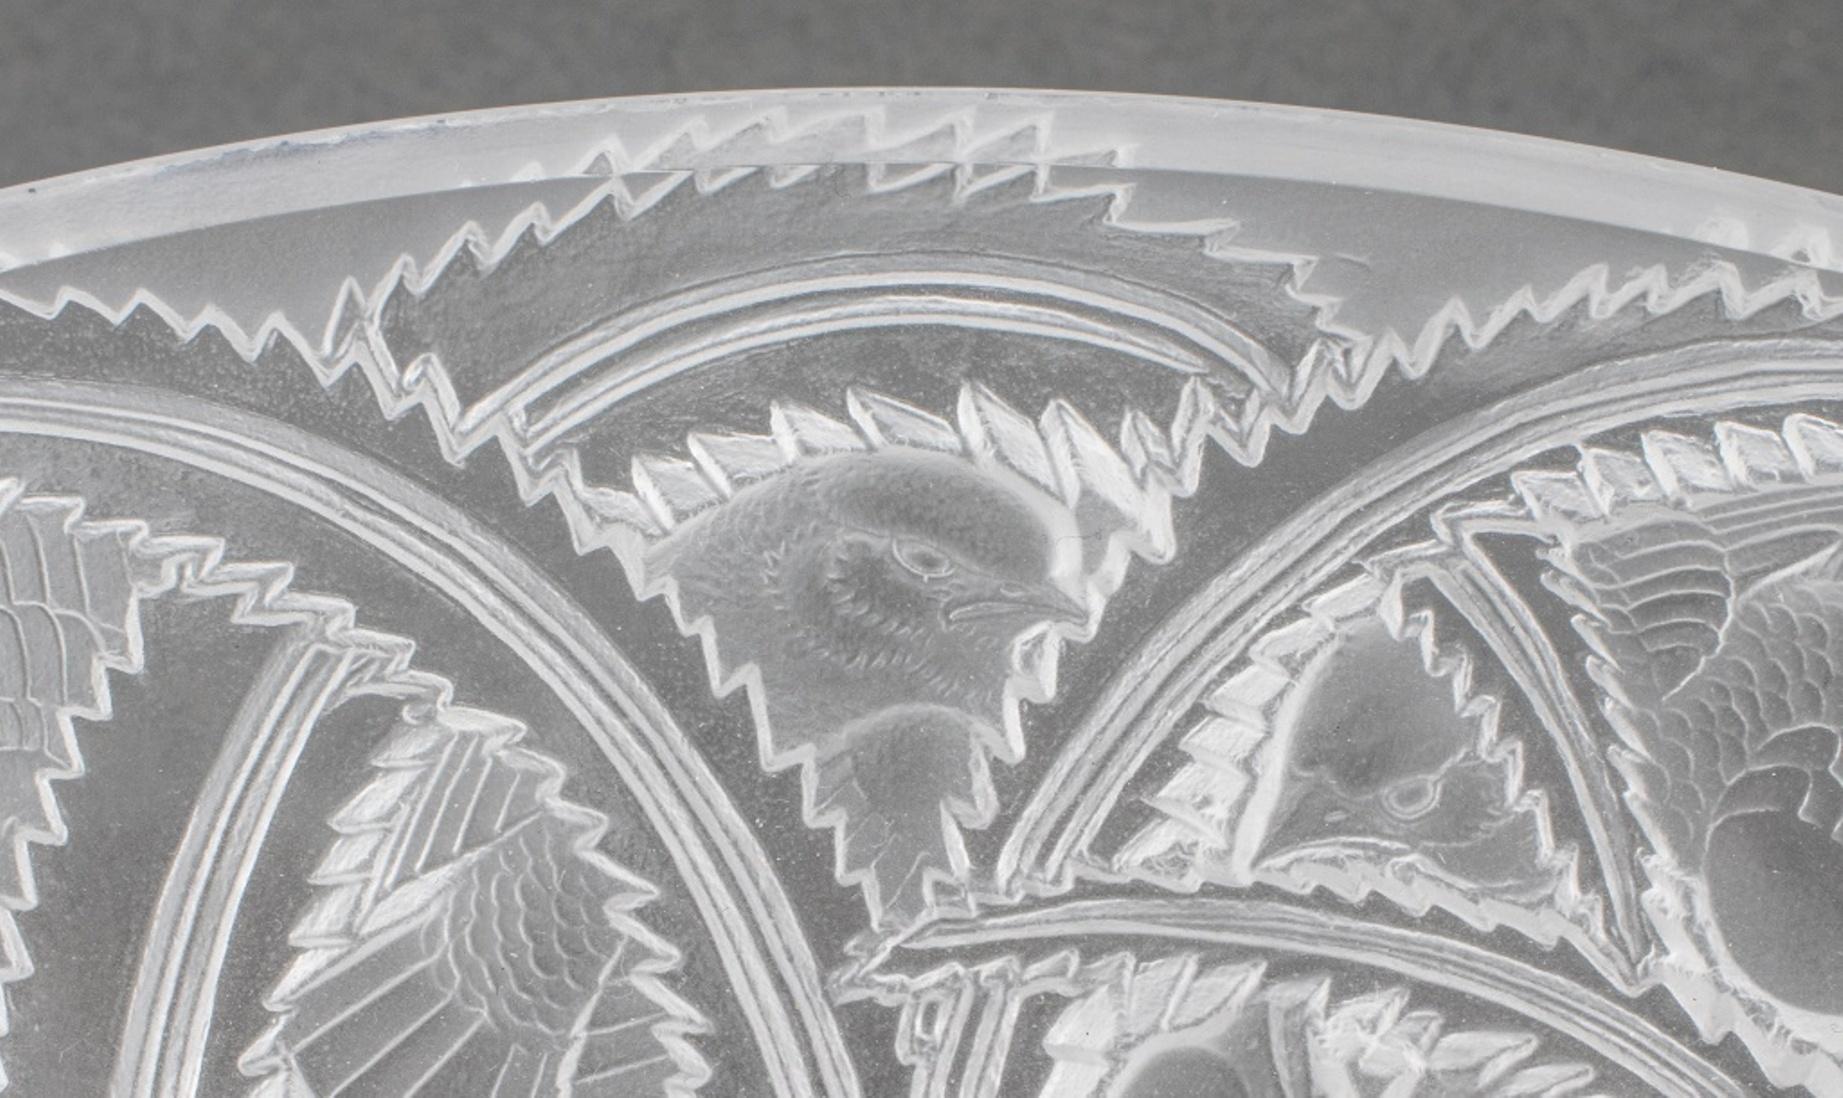 Lalique frosted and clear cut crystal bowl with birds amongst stylized geometric foliage, marked 